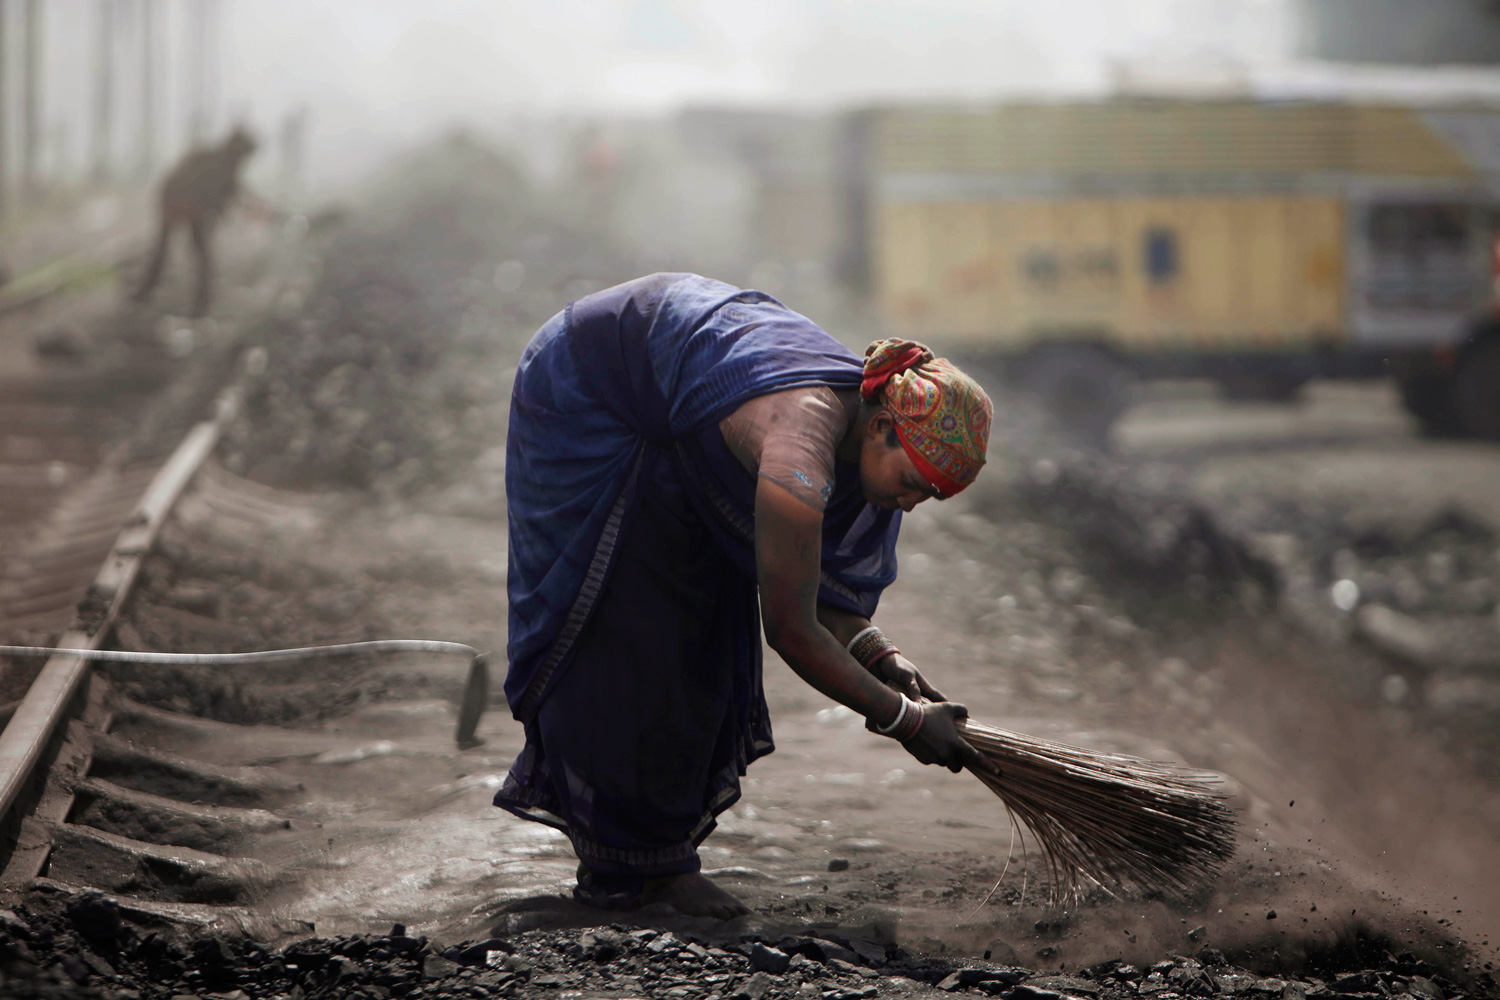 March 23, 2012. An Indian woman cleans the path near a coal depot on the outskirts of Jammu, India.